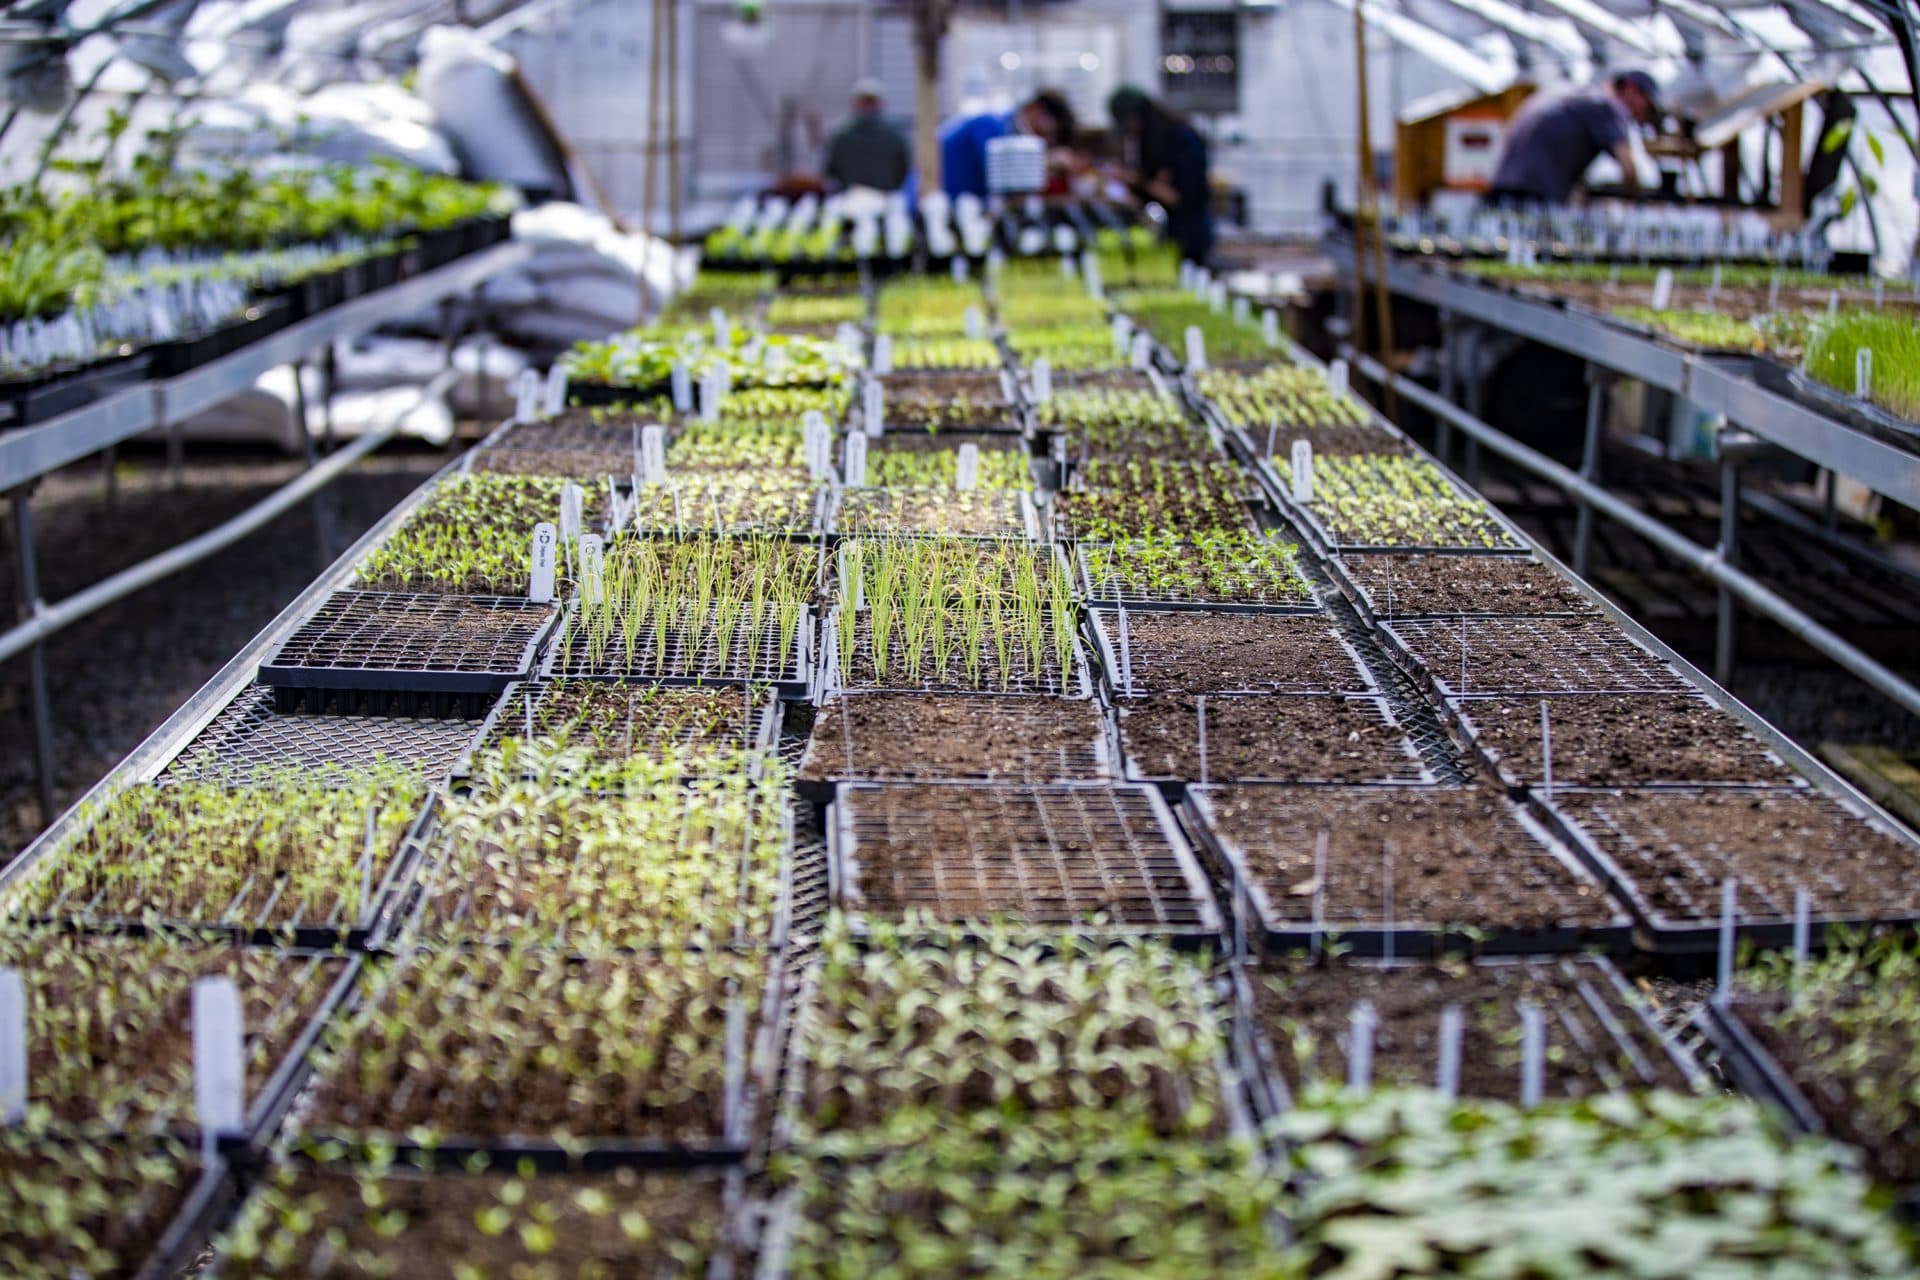 Seedlings in the greenhouse at the ReVision Urban Farm in Mattapan. (Jesse Costa/WBUR)